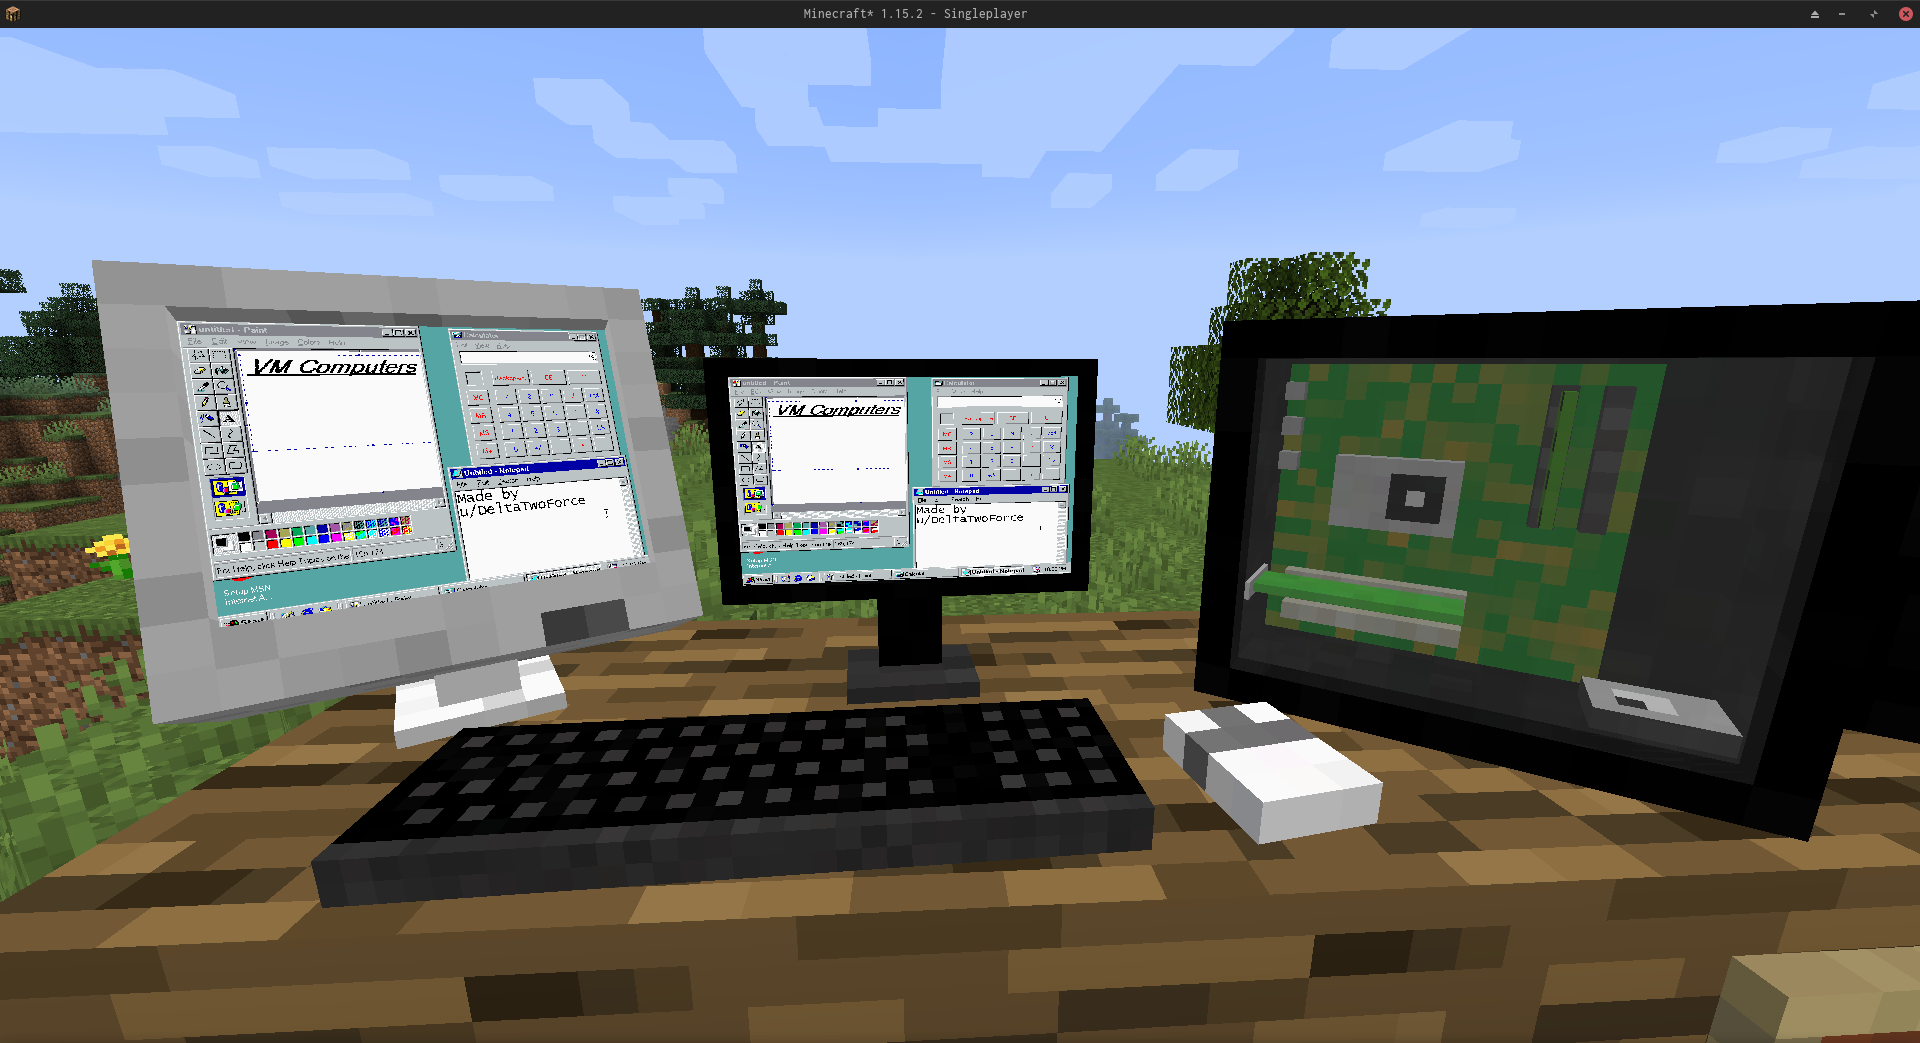 This Minecraft mod lets you play Minecraft on a PC in Minecraft